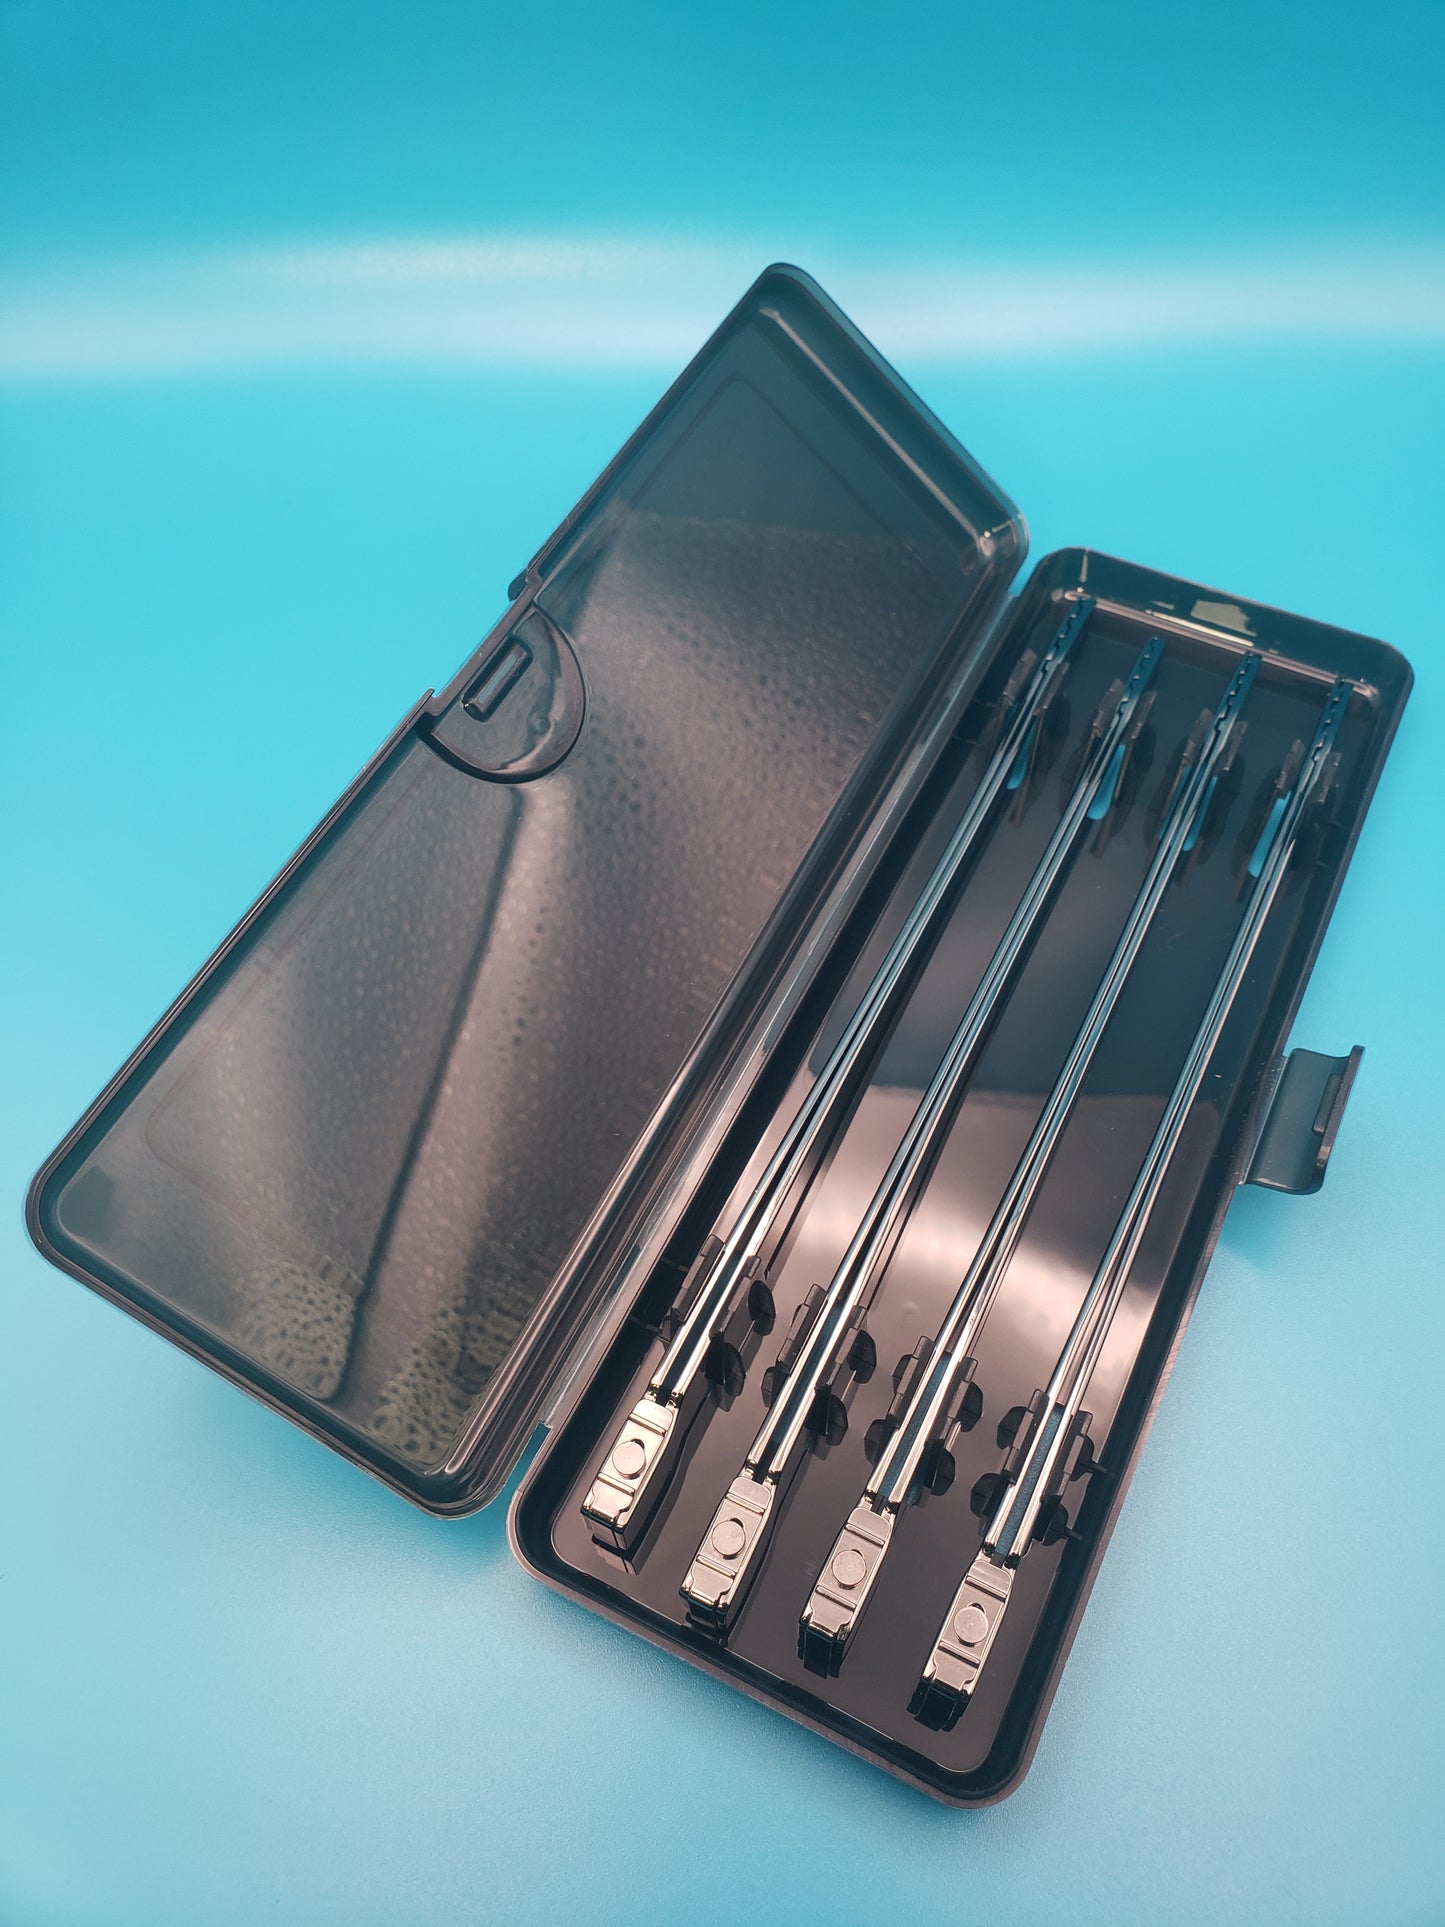 Fourth Option Family Carry Case